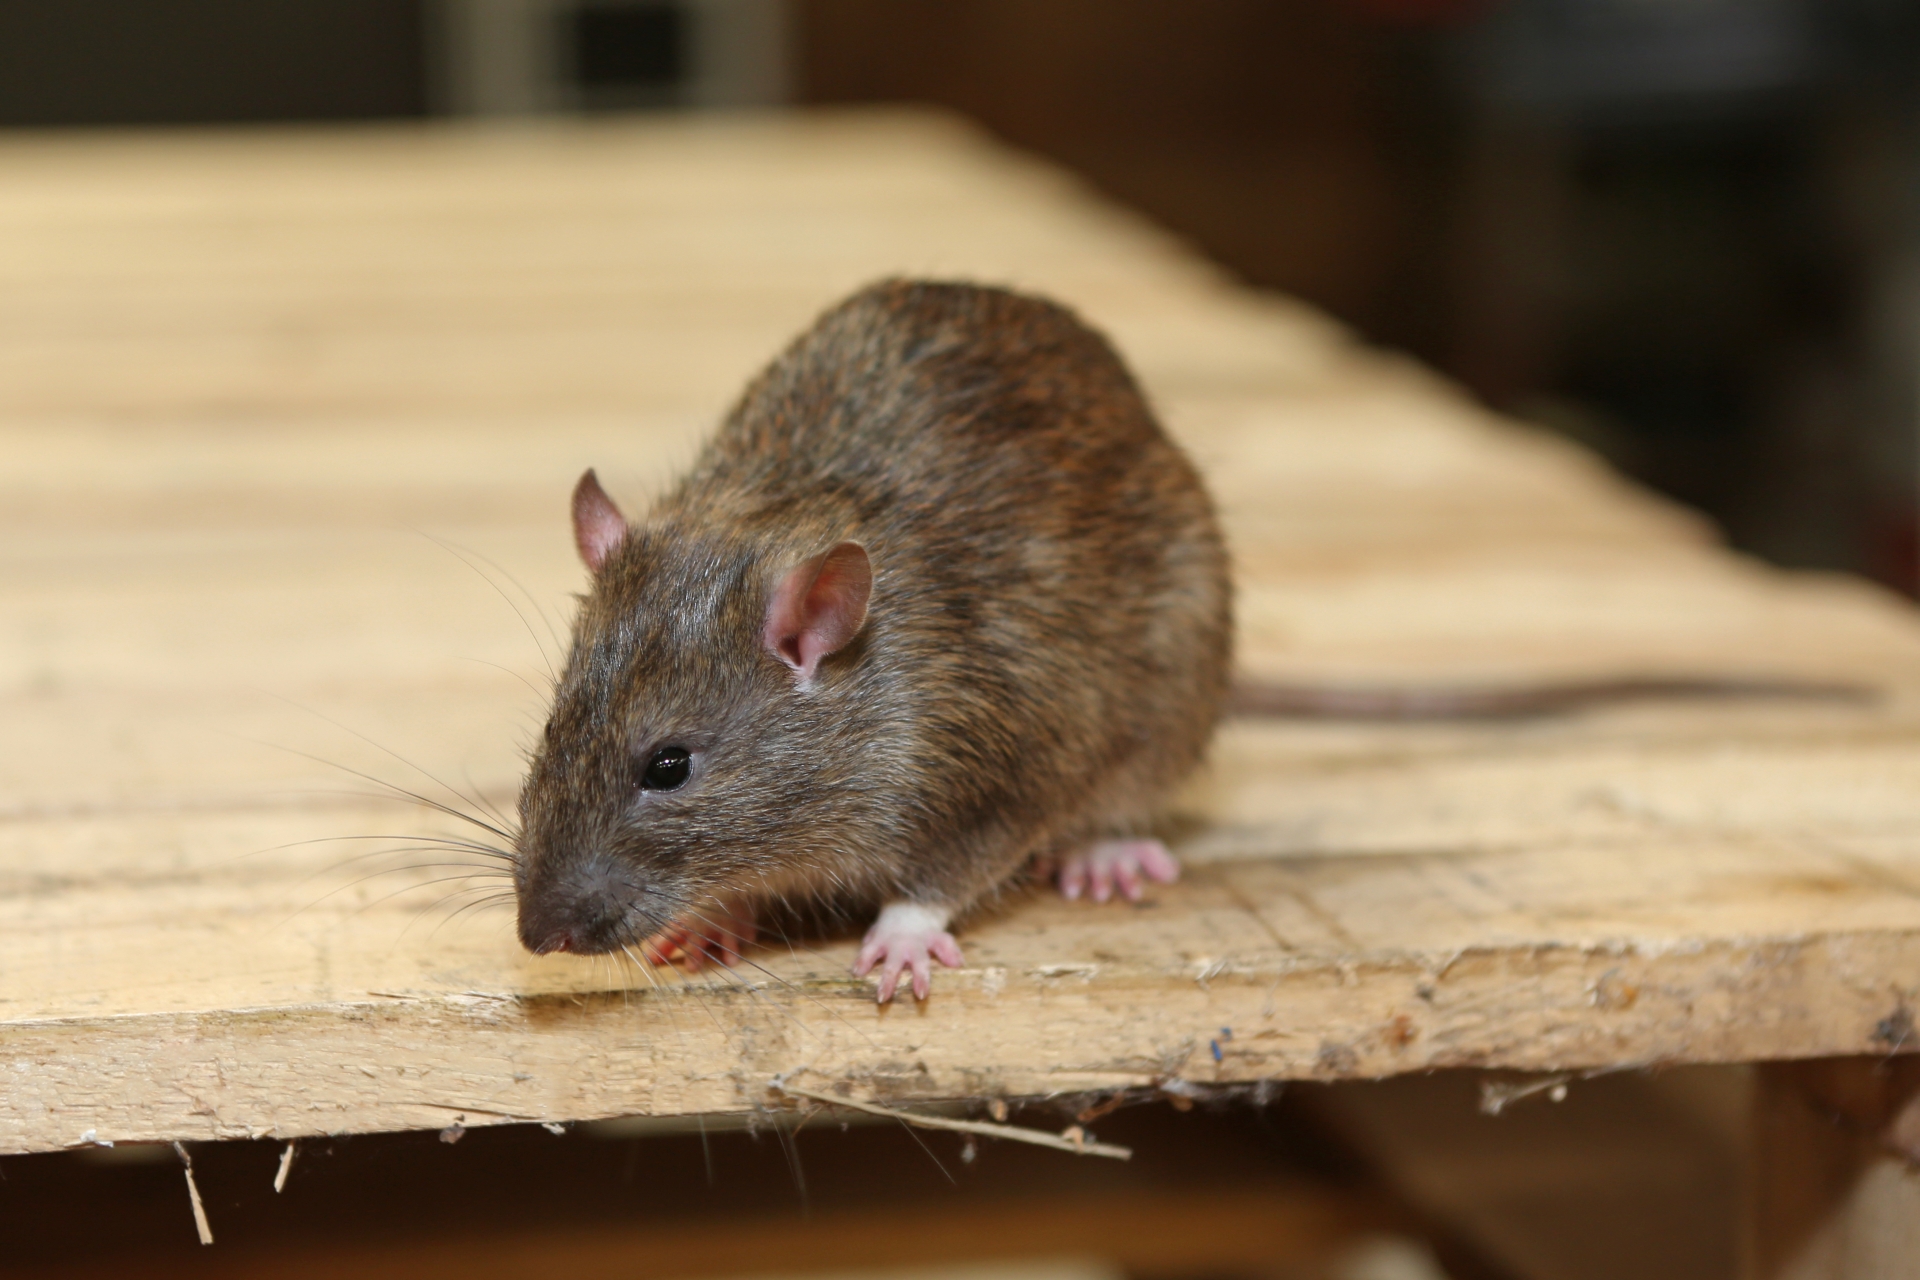 Rat Control, Pest Control in Kentish Town, NW5. Call Now 020 8166 9746